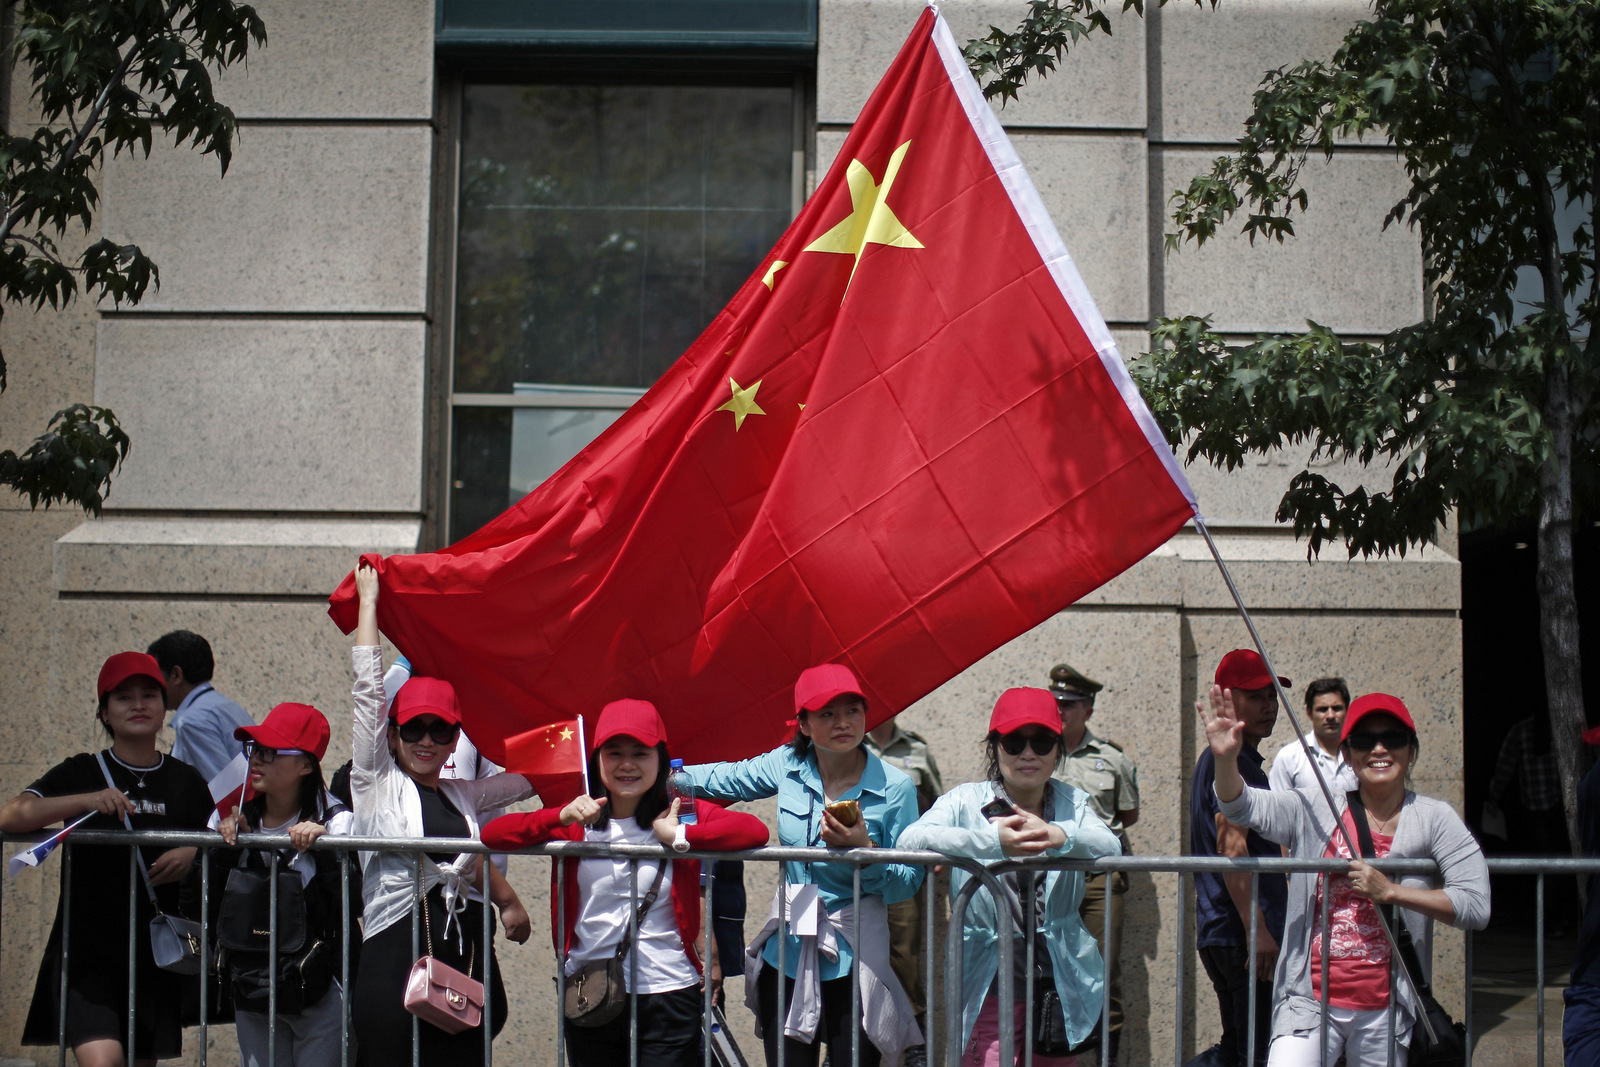 Members of the Chinese community living in Chile await the arrival of China's President Xi Jinping outside La Moneda presidential palace in Santiago, Chile, Tuesday, Nov. 22, 2016. Jinping is in Chile after attending the APEC summit in Peru. (AP Photo/Luis Hidalgo)